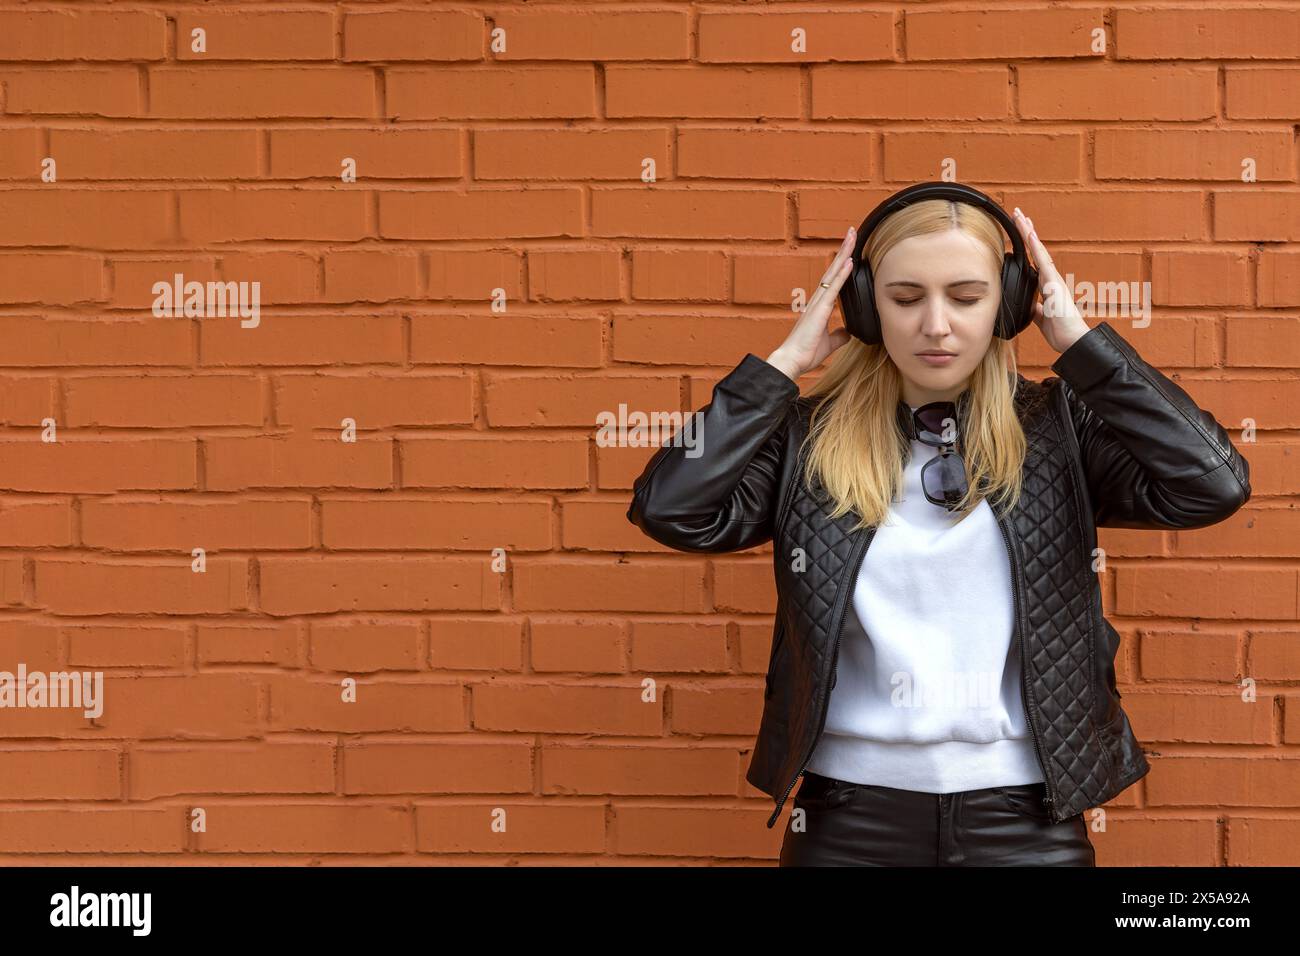 A stylish young woman is enjoying music on her headphones outdoors, standing against a vibrant orange brick wall backdrop Stock Photo